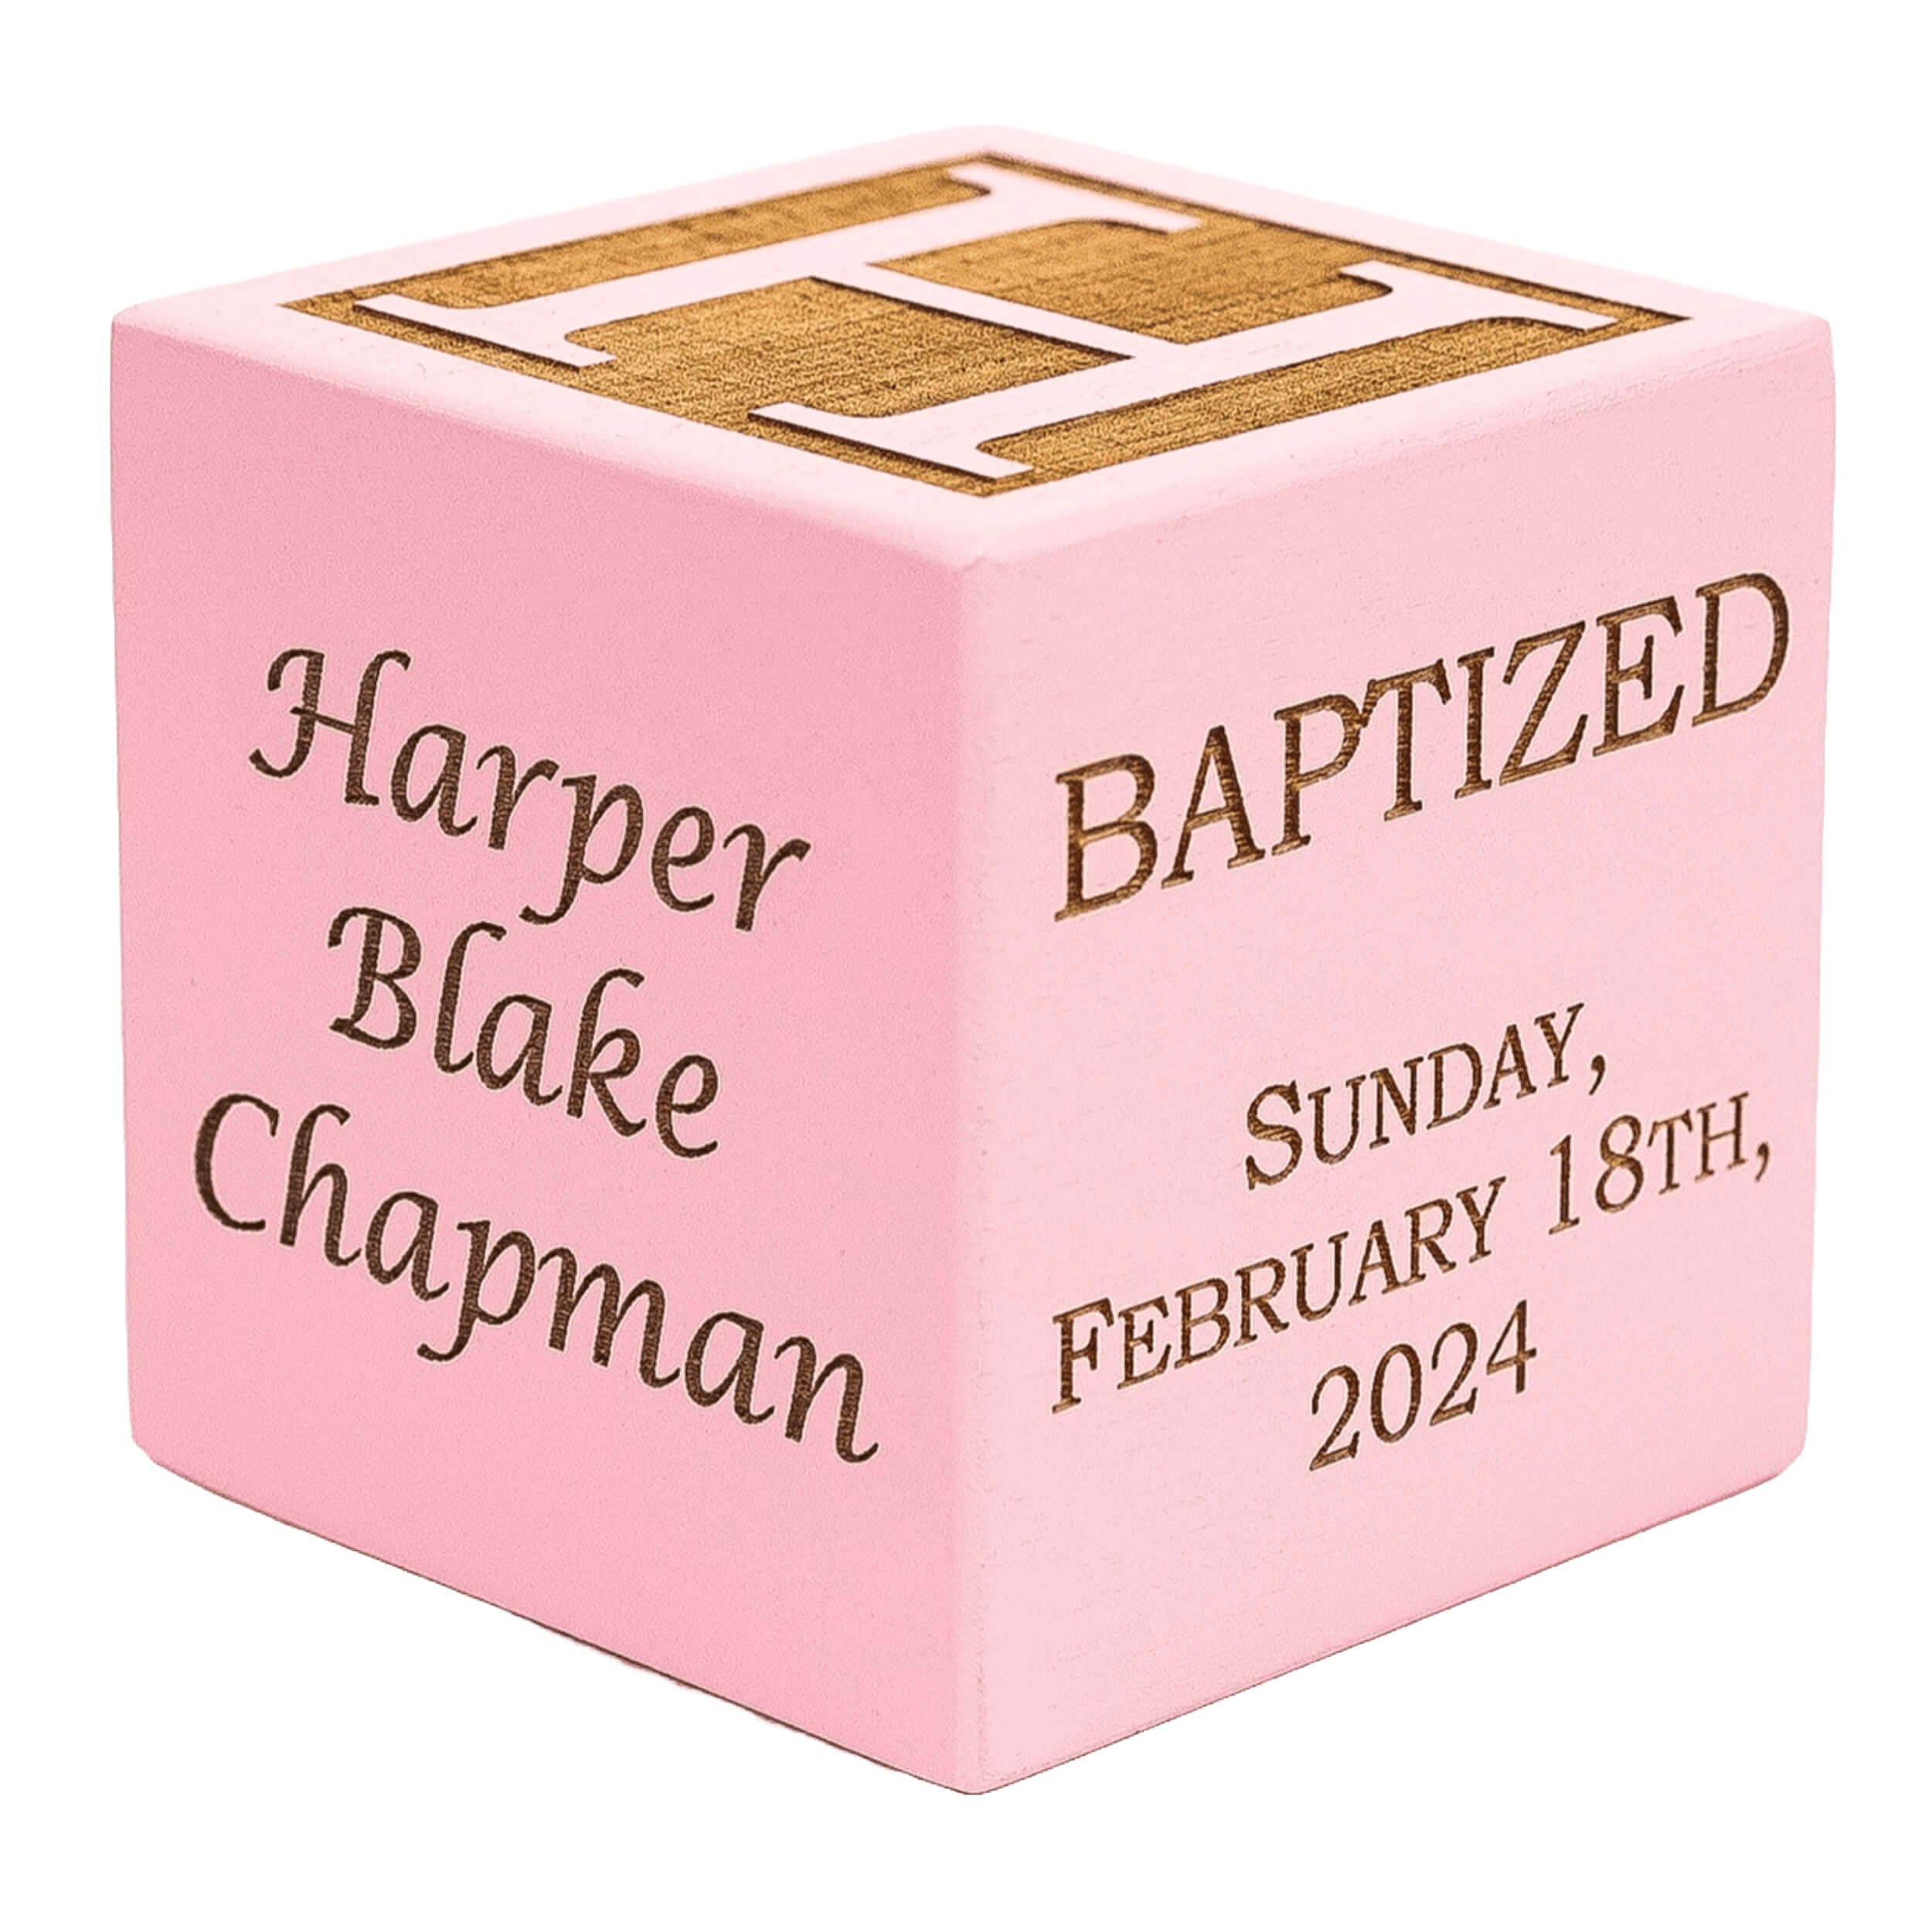 Palmetto Wood Shop Personalized Baby Baptism, Dedication, Christening Gift, Solid Wood Block - image 1 of 8